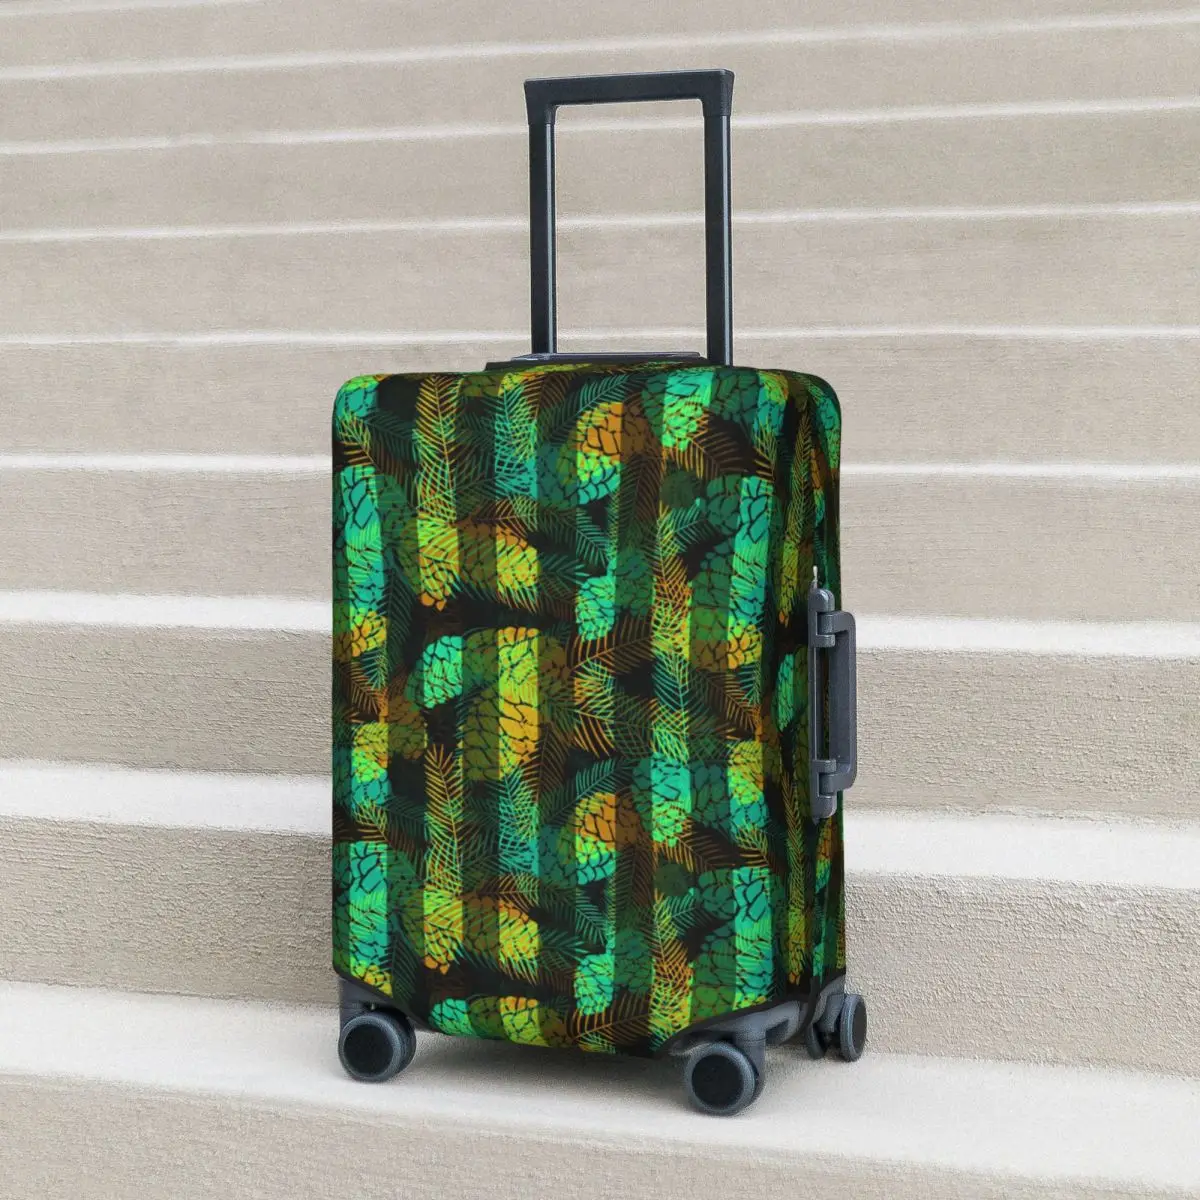 

Green Pine Cones Suitcase Cover Stripes Print Travel Vacation Fun Luggage Case Protection